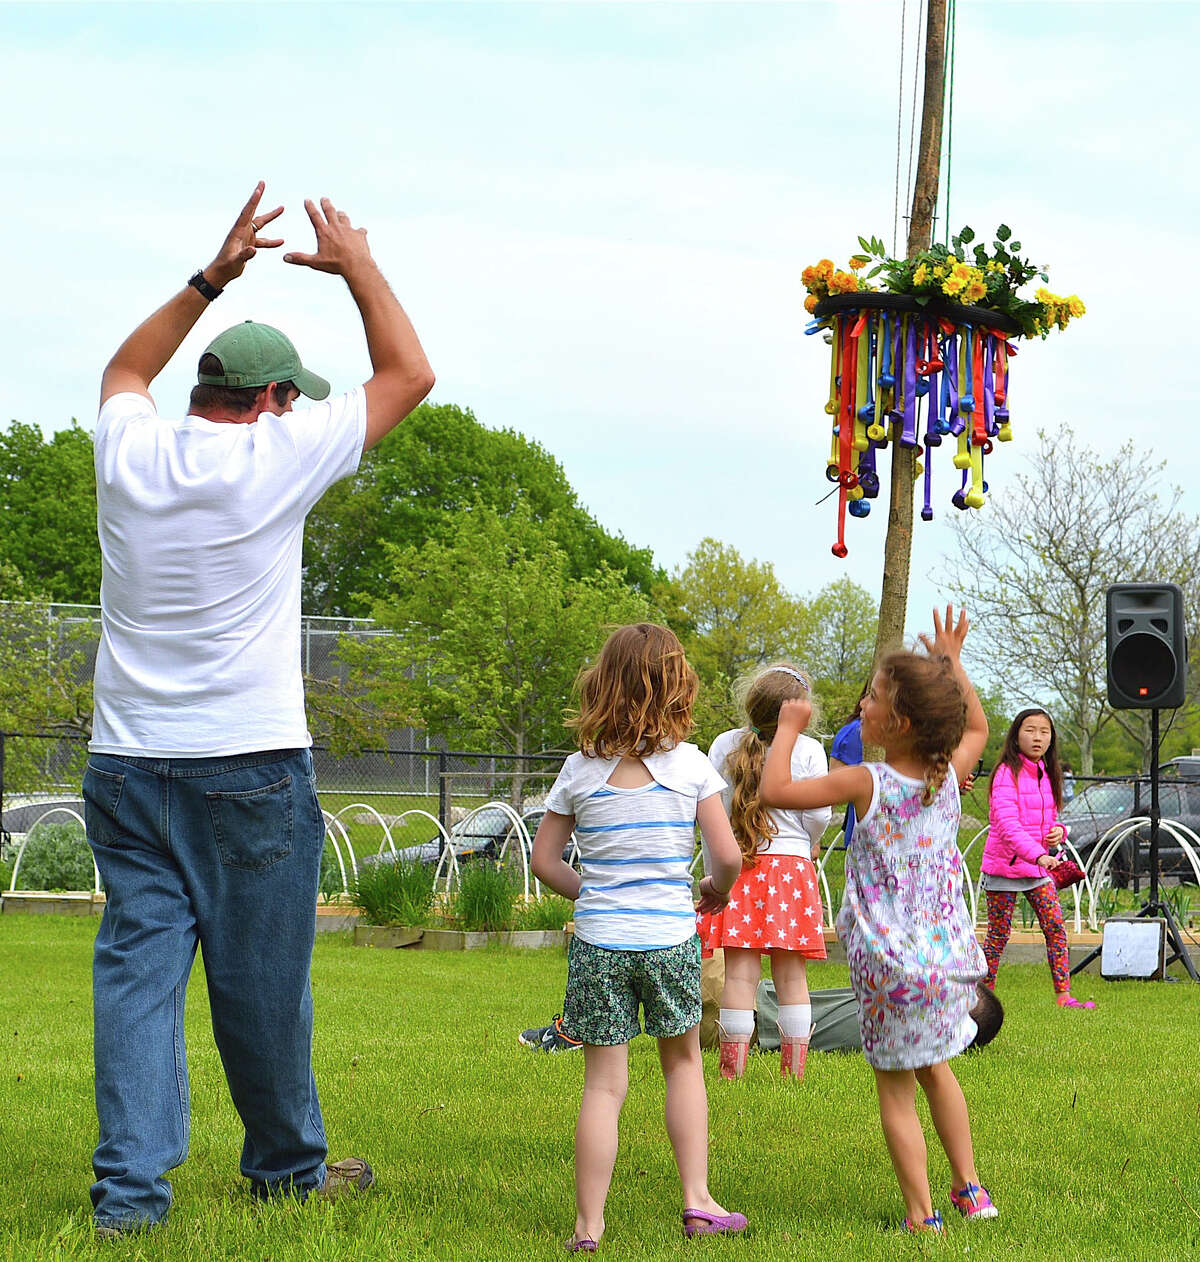 Mike Aitkenhead, steward of Wakeman Town Farm, shows youngsters how the maypole dance works during its GreenDay program.